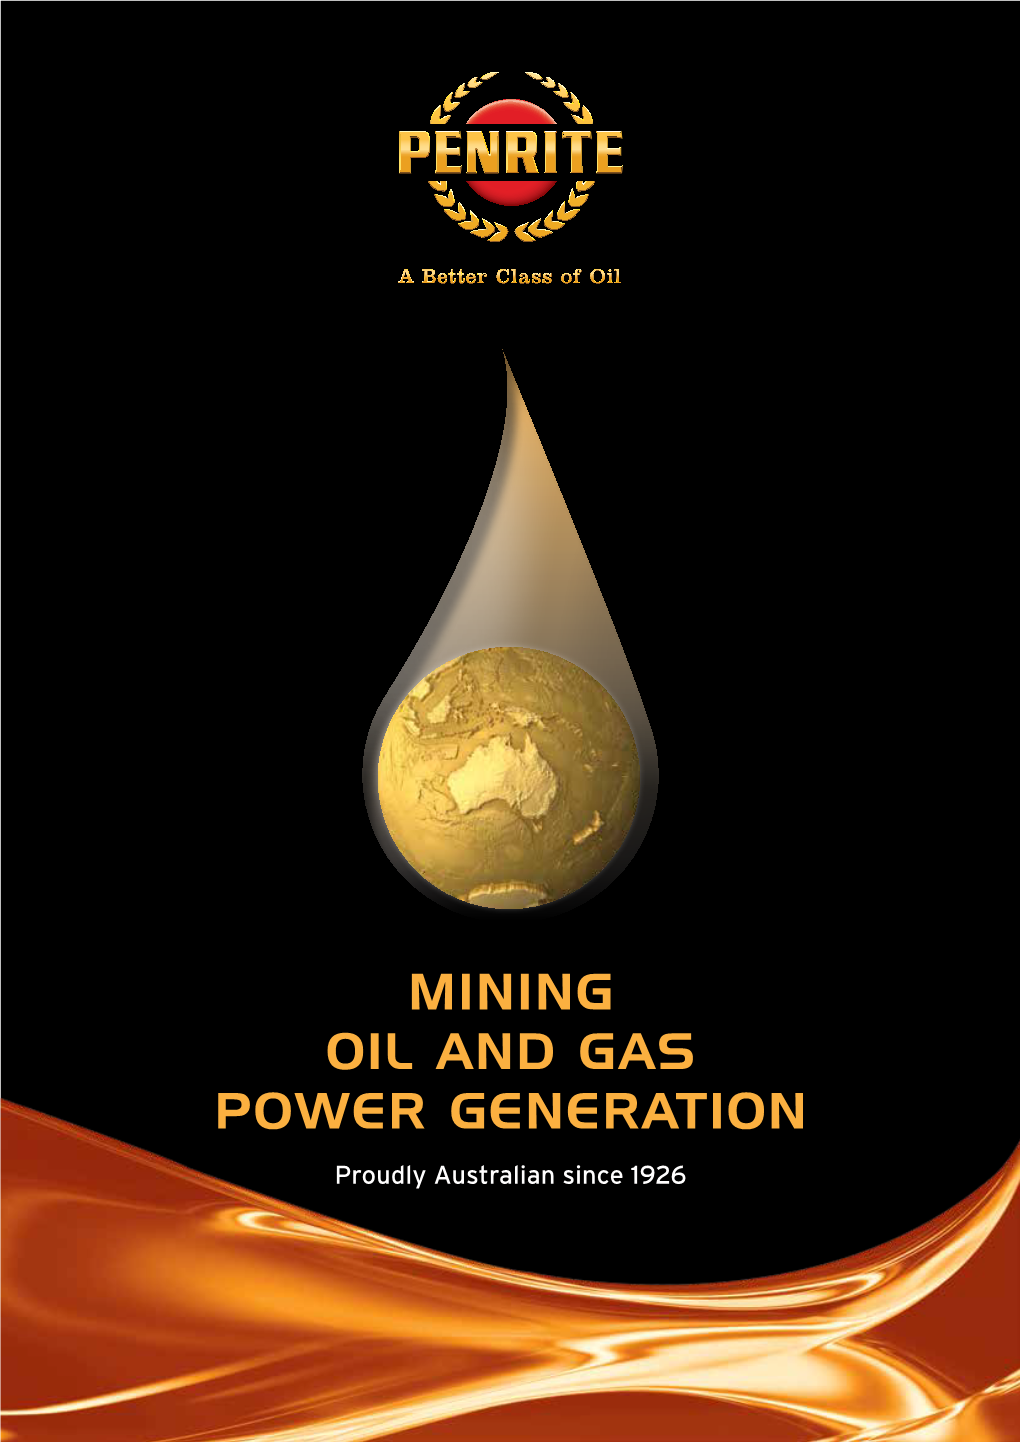 MINING OIL and GAS POWER GENERATION Proudly Australian Since 1926 Proudly Australian